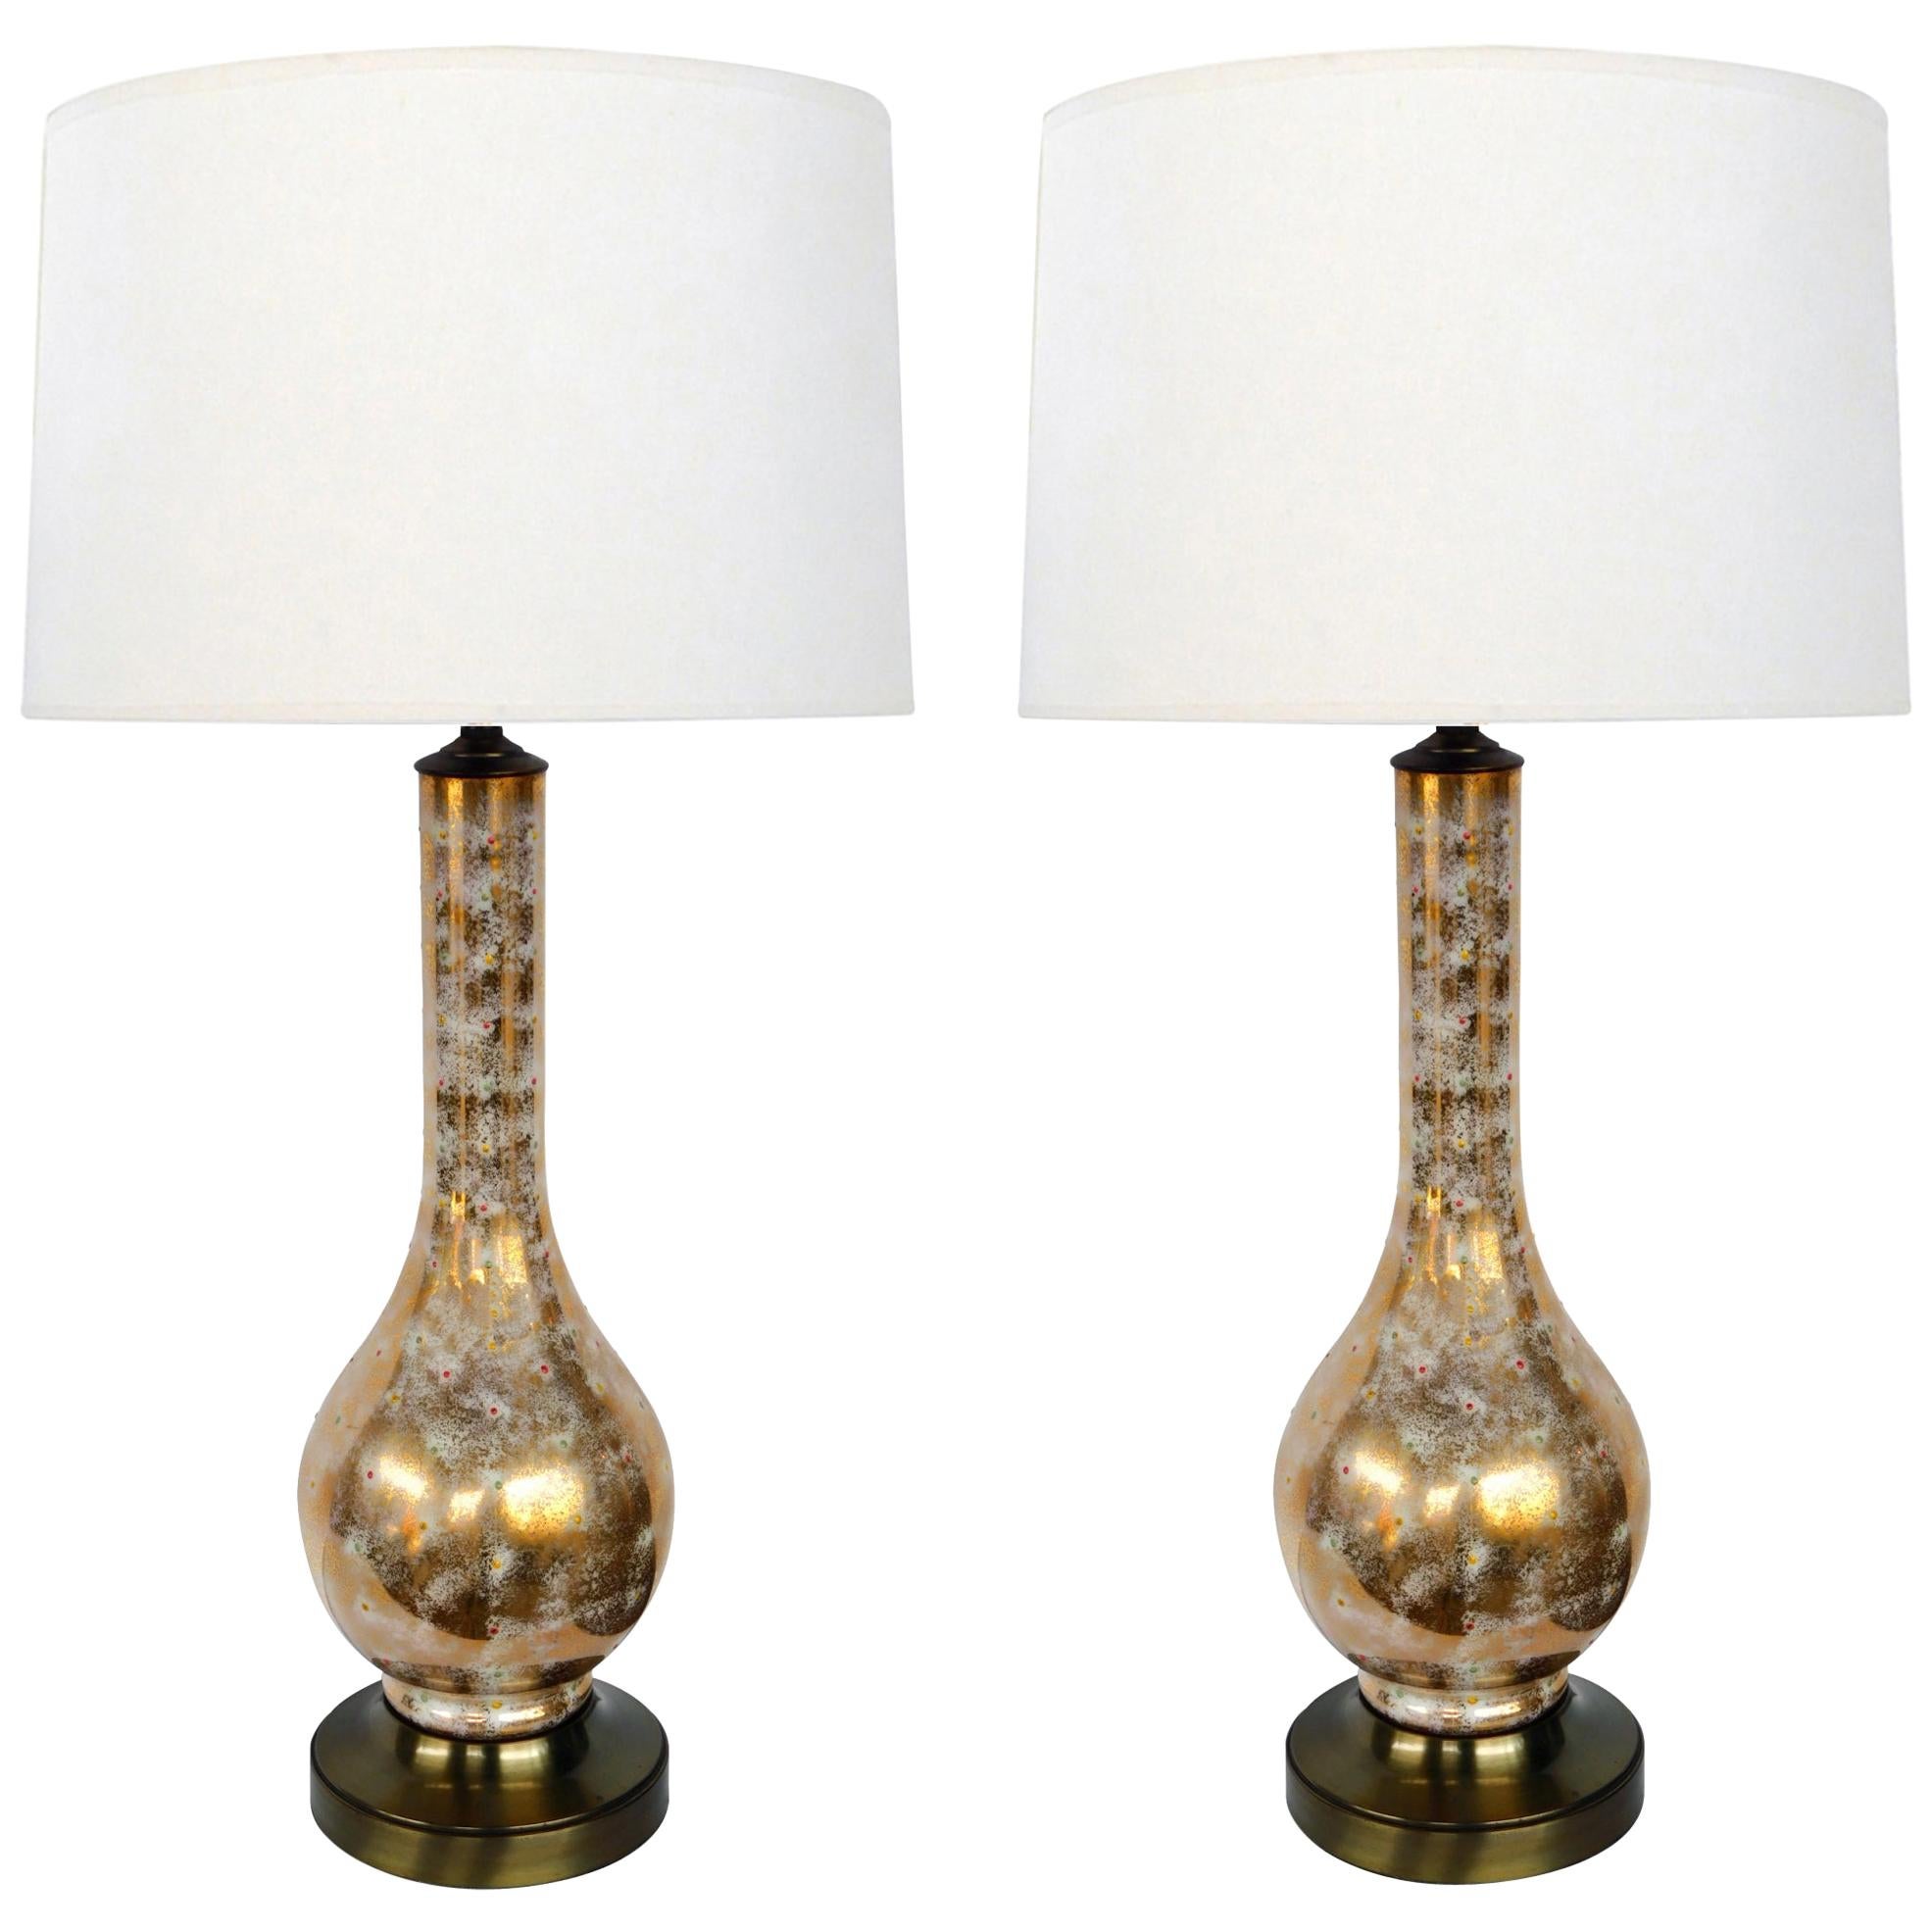 Pair of Murano 1960s Gold and White Glazed Bottle-form Lamps with Colored Fleck